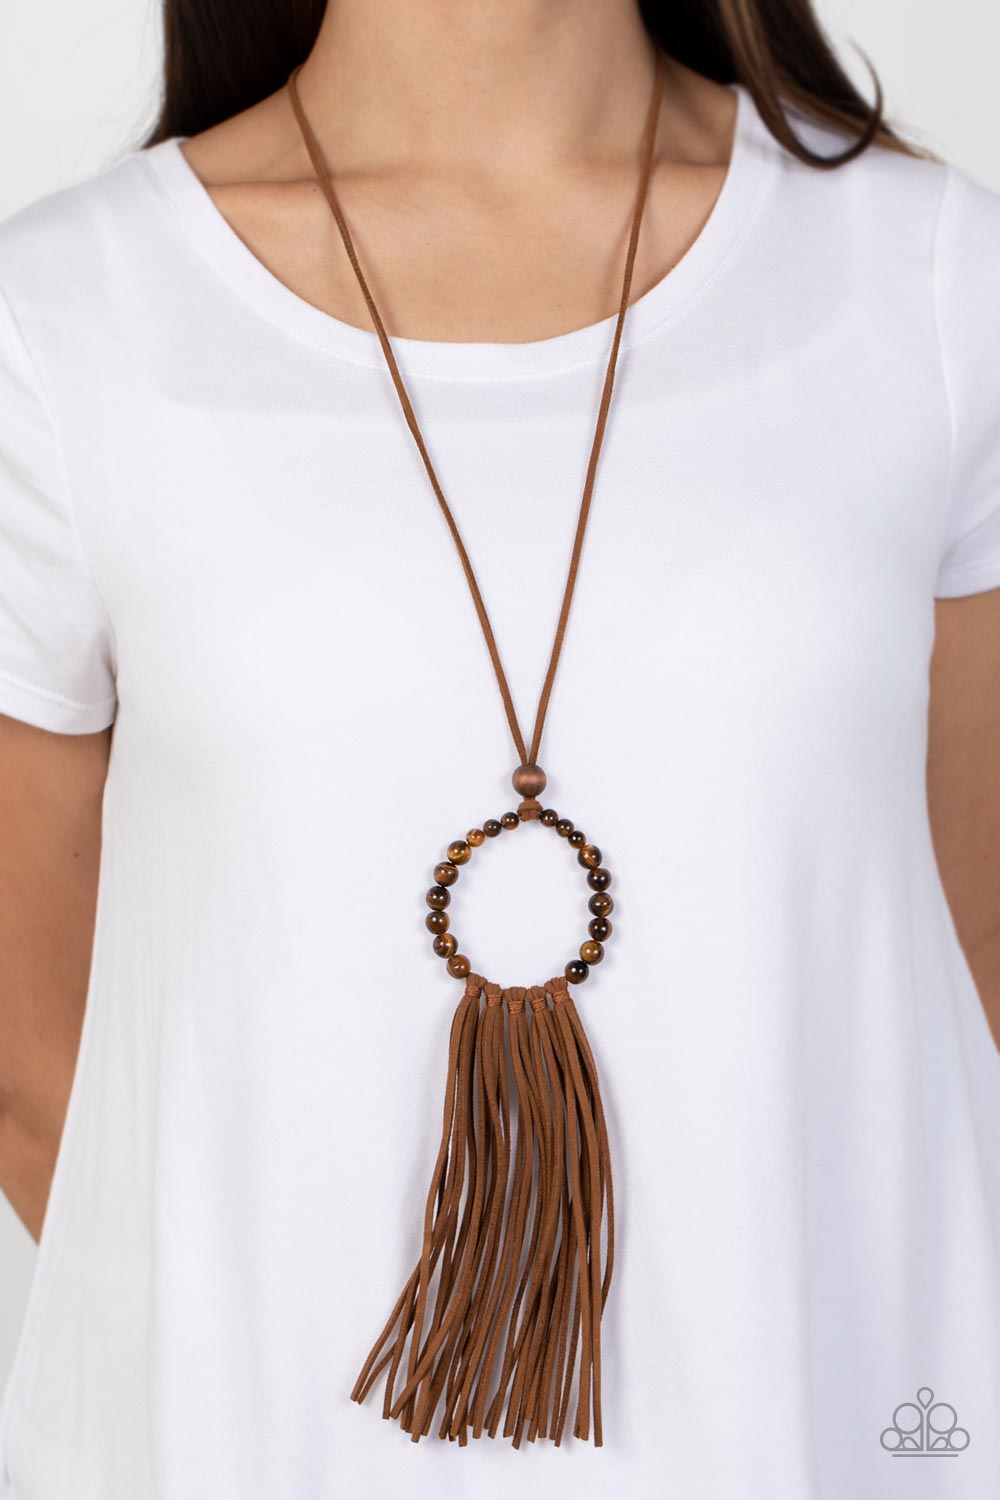 Namaste Mama Paparazzi Accessories Necklace with Earrings - Brown